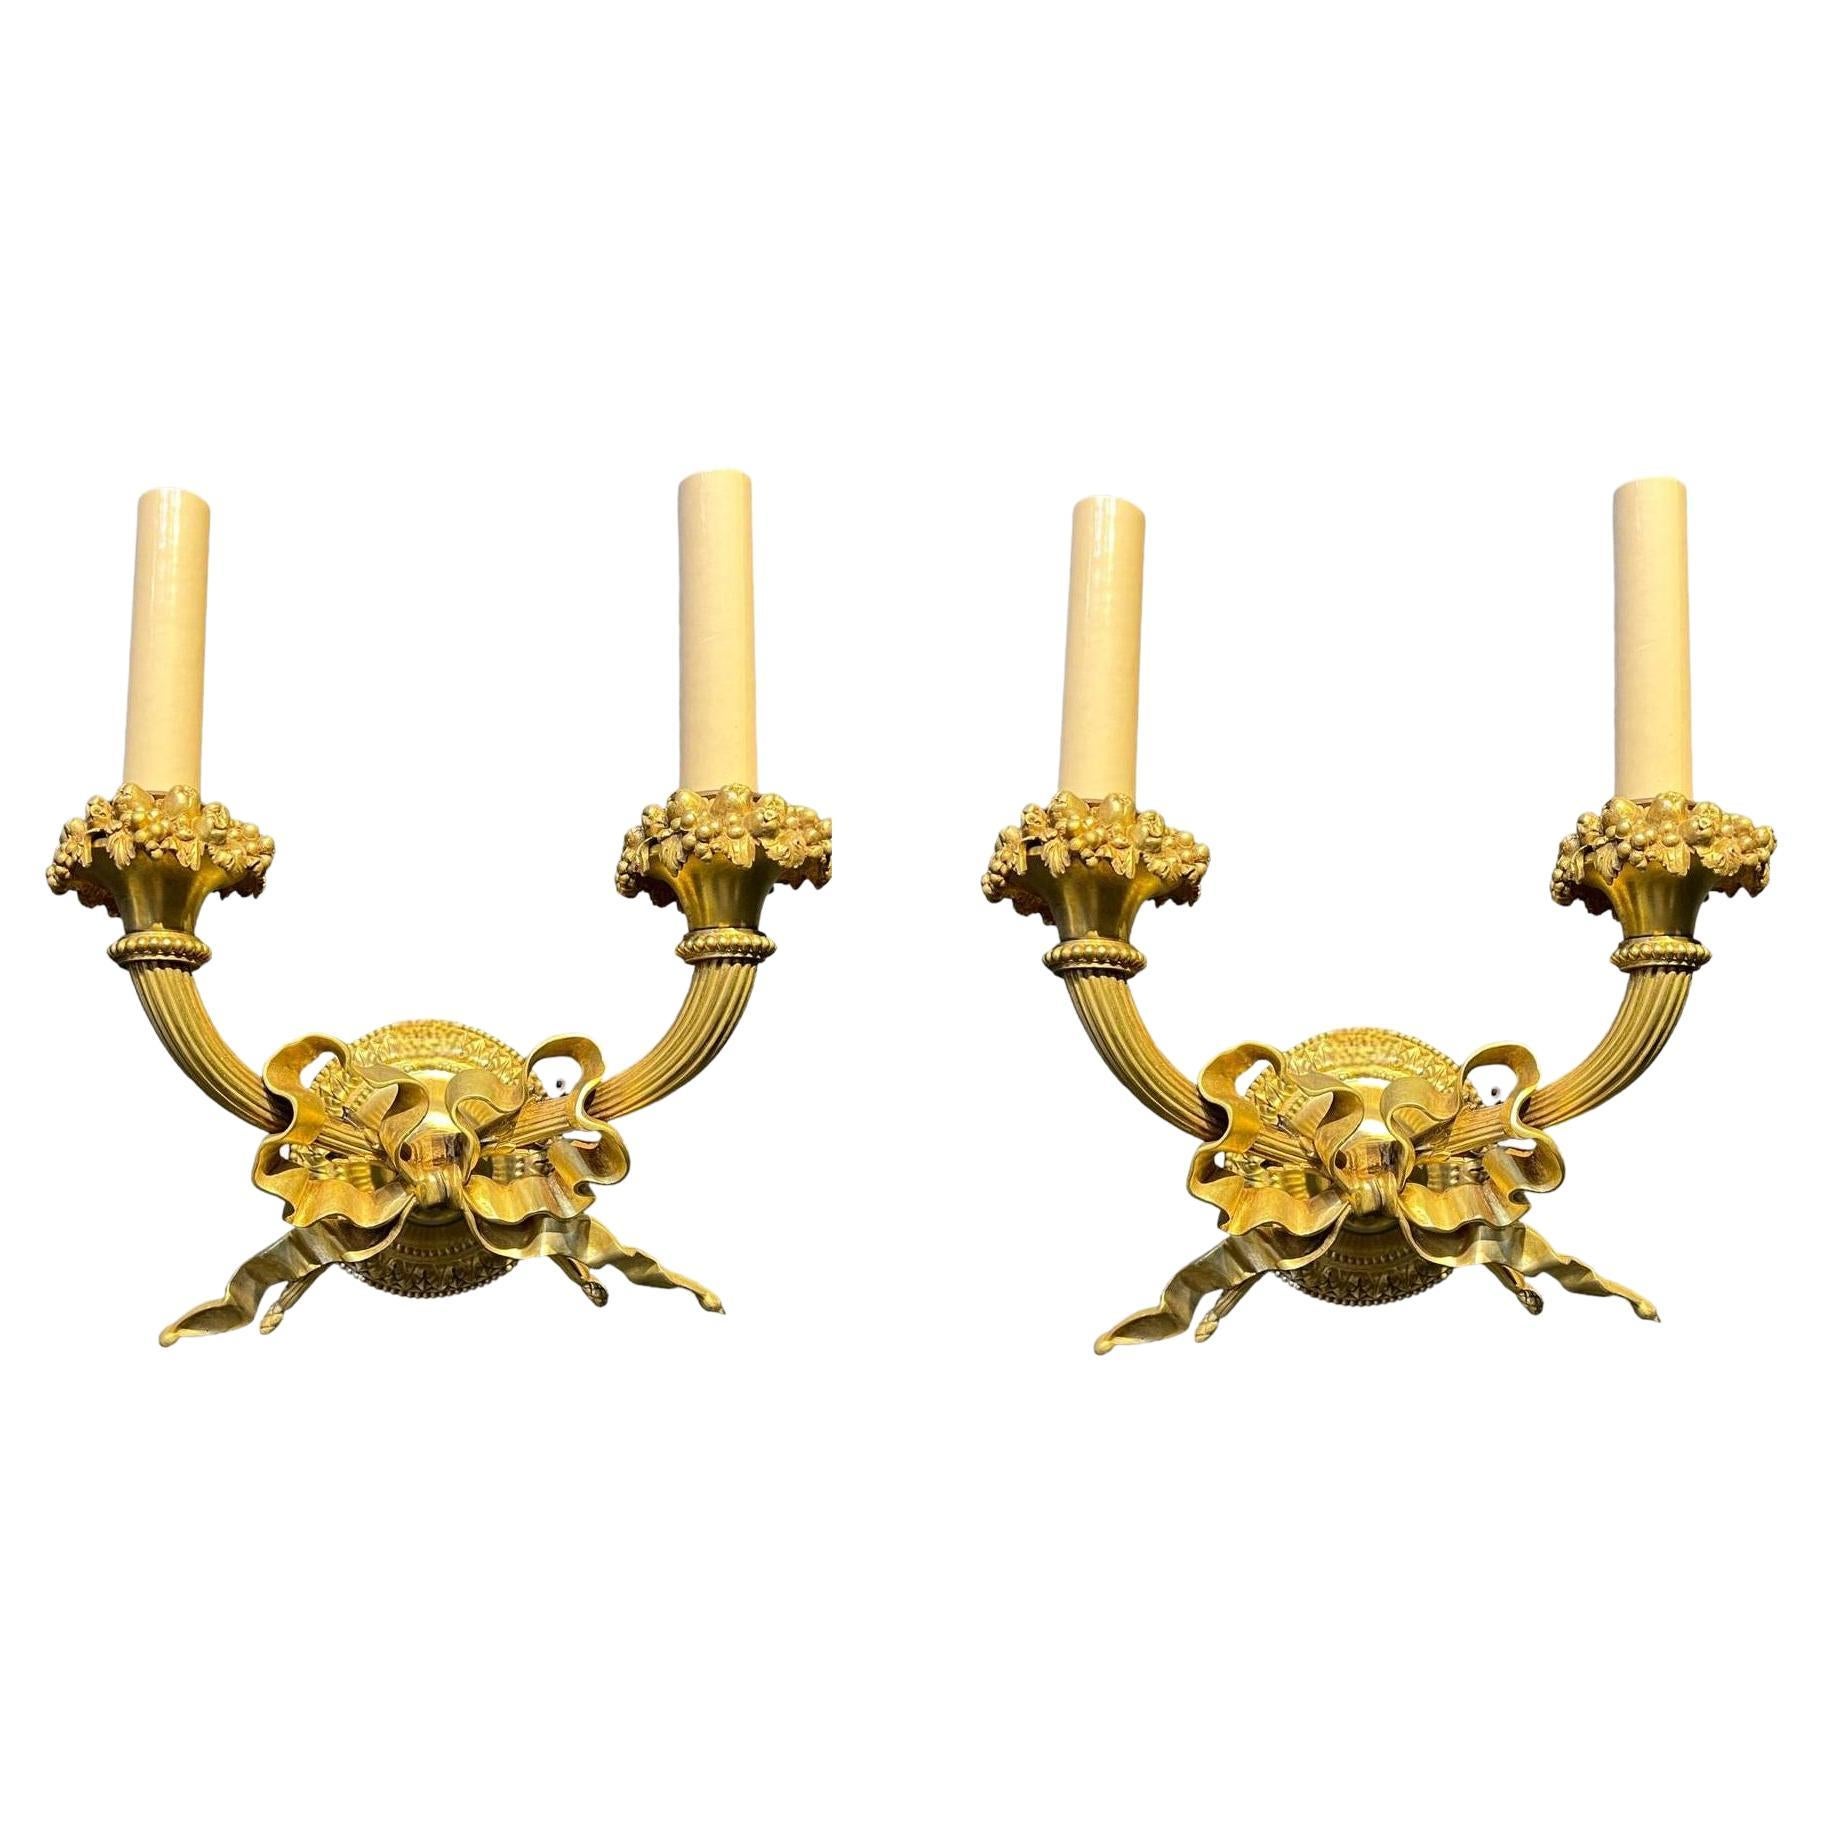 Pair of 1920's Caldwell Gilt Bronze Sconces with Ribbon For Sale